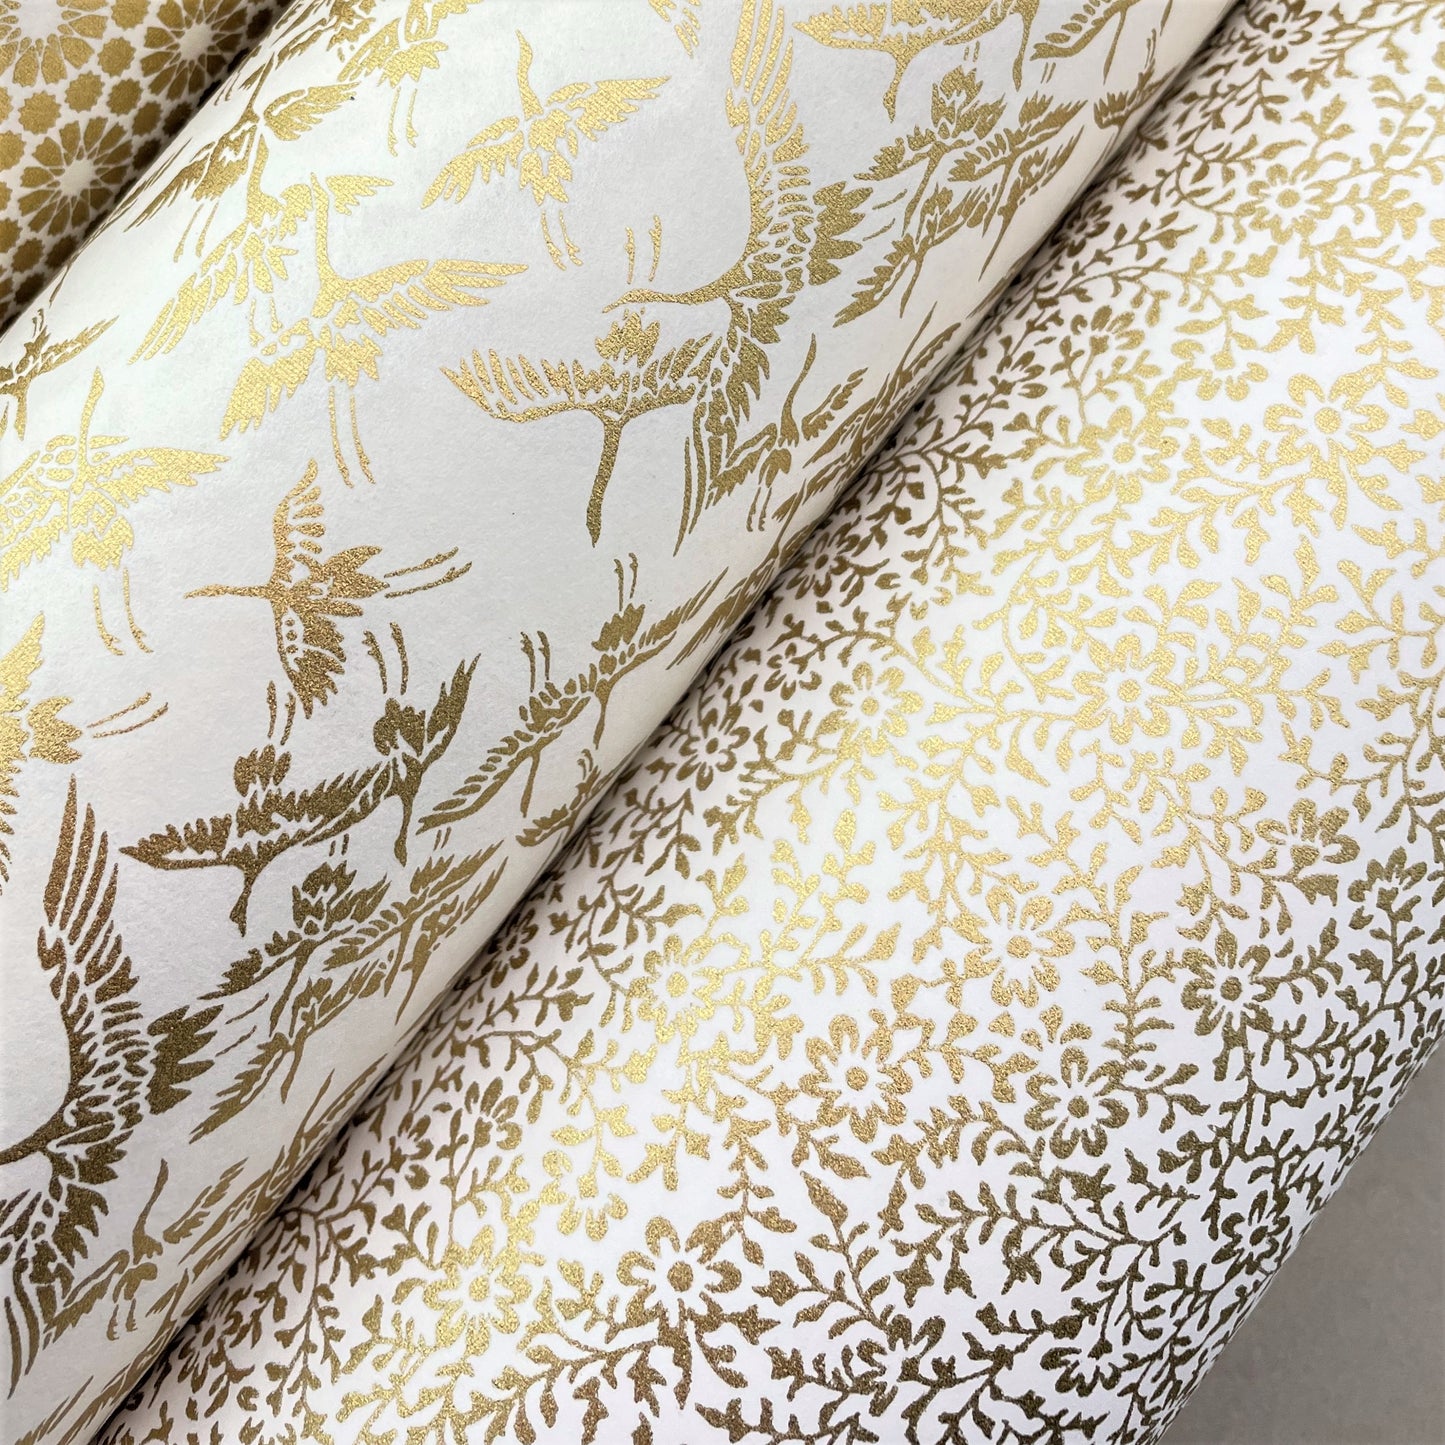 japanese silk-screen handmade paper showing a dainty gold botanical repeat design on ivory backdrop, lifestyle shot with other gold papers